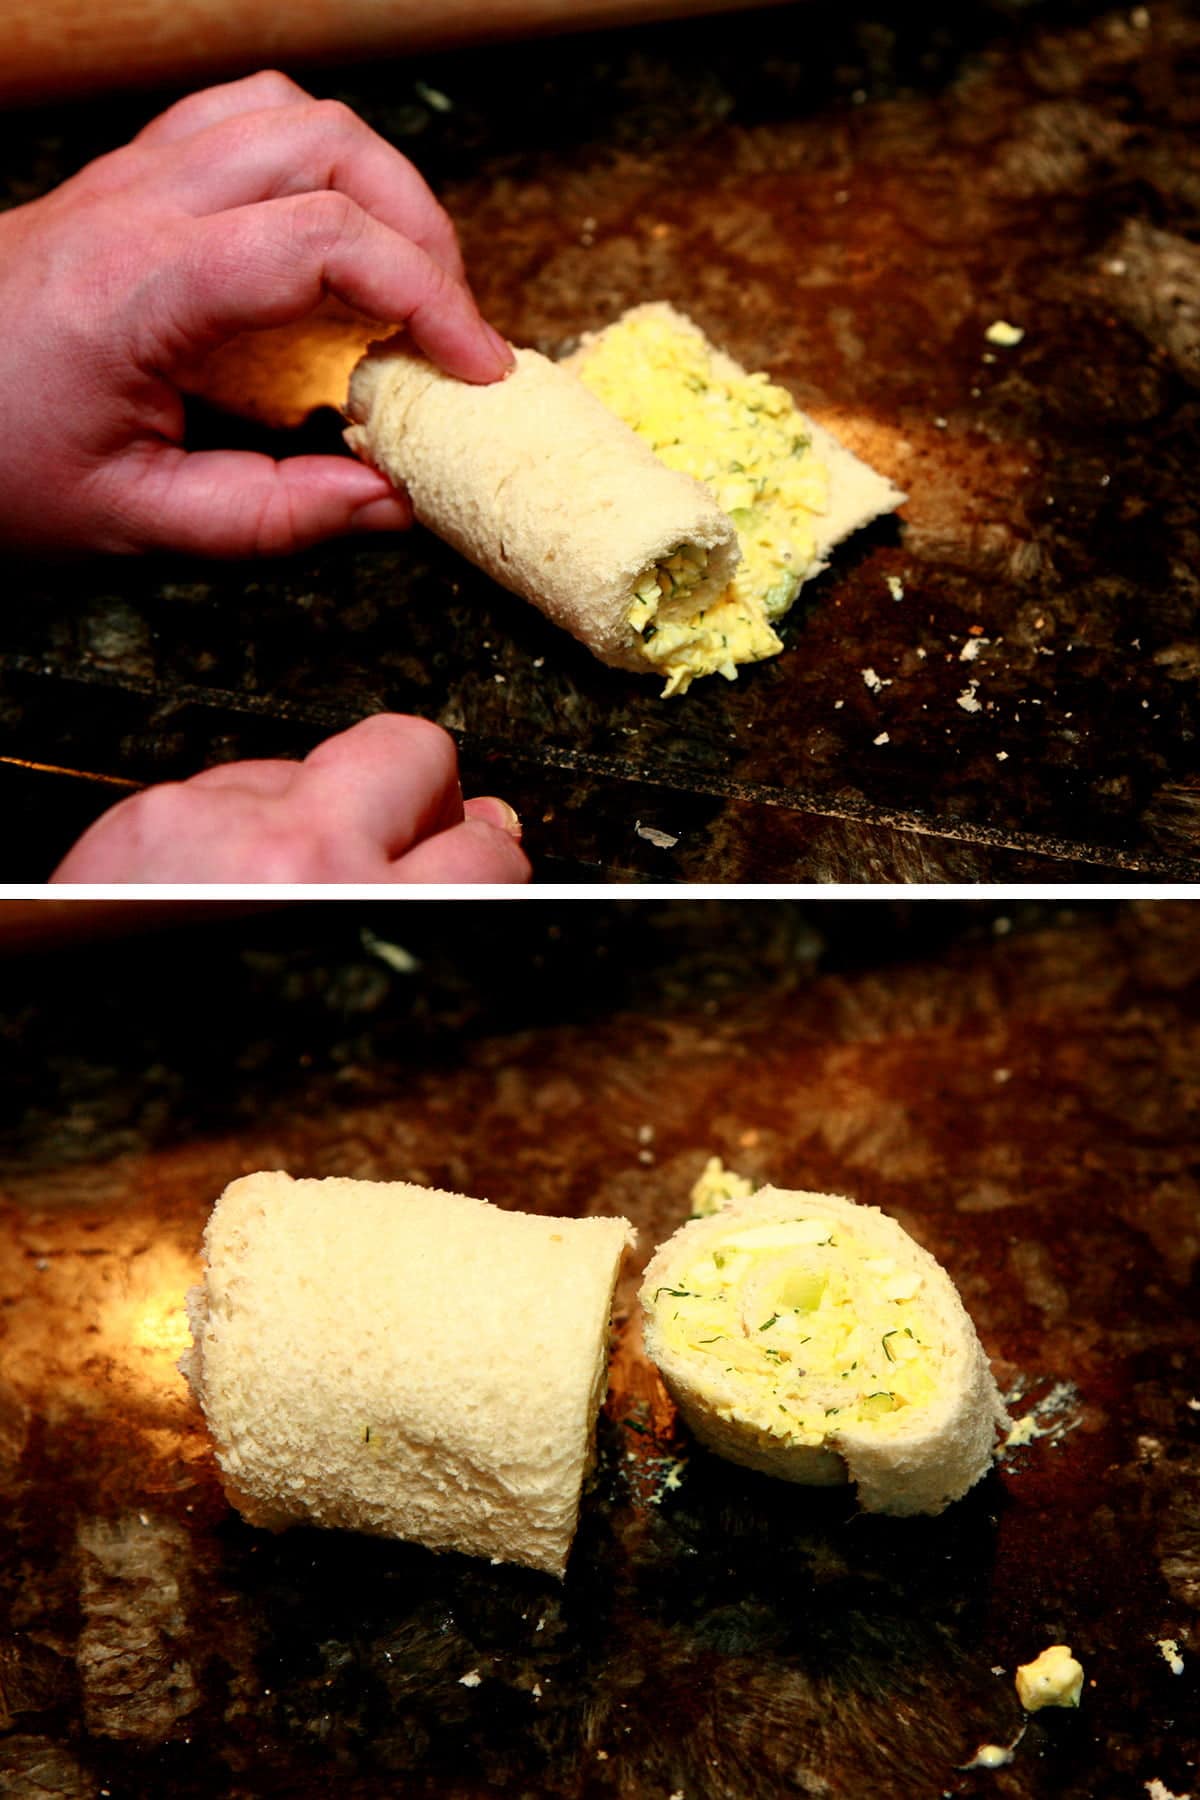 A two part compilation image showing a long sice of bread with egg salad being rolled up.